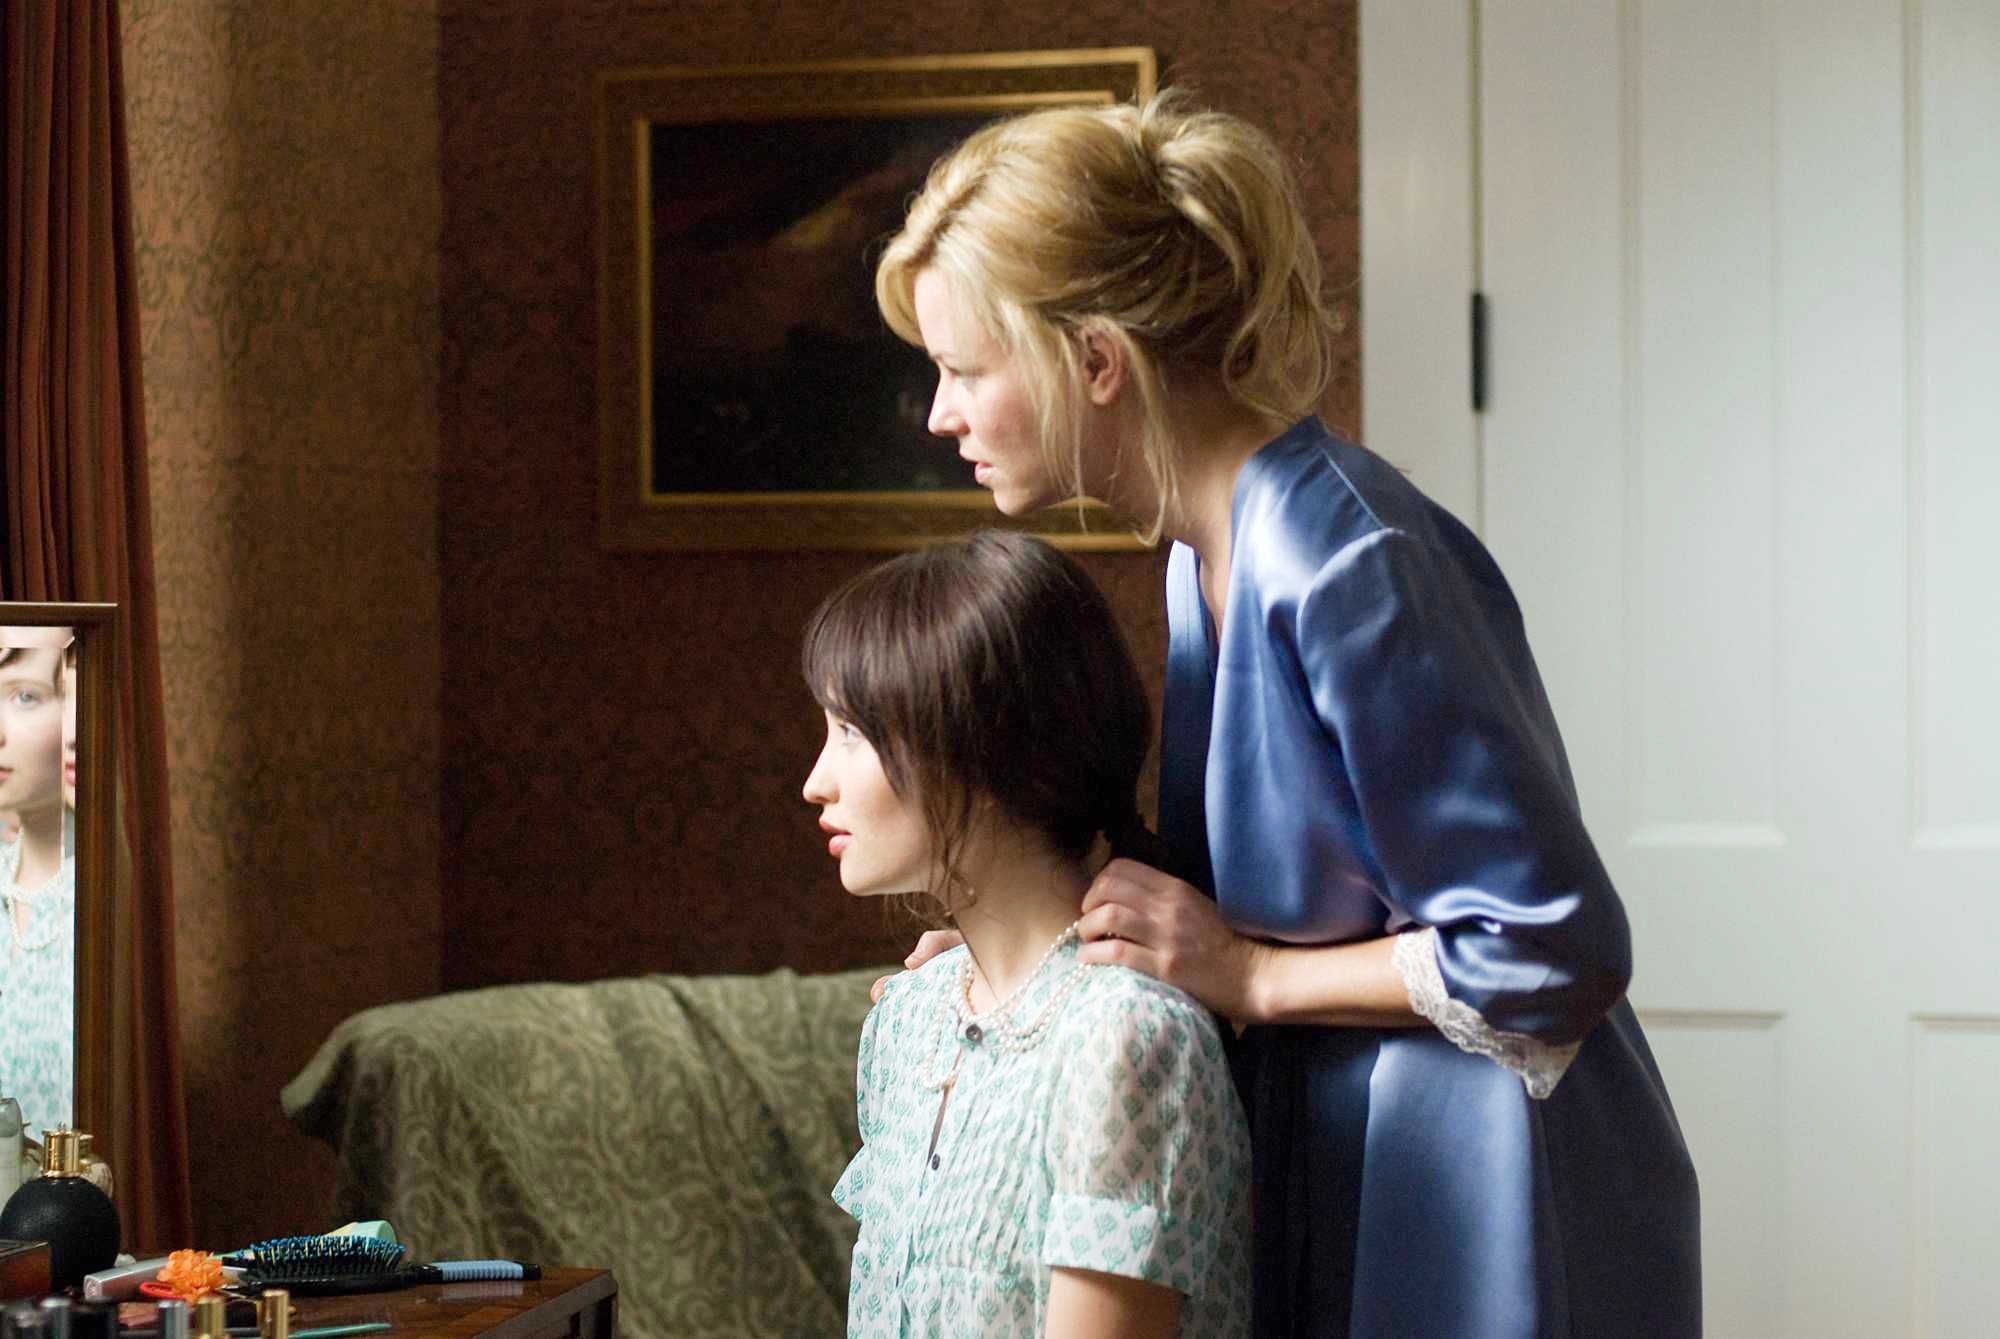 Emily Browning stars as Anna and Elizabeth Banks stars as Rachael in DreamWorks' The Uninvited (2009). Photo credit by Kimberley French.